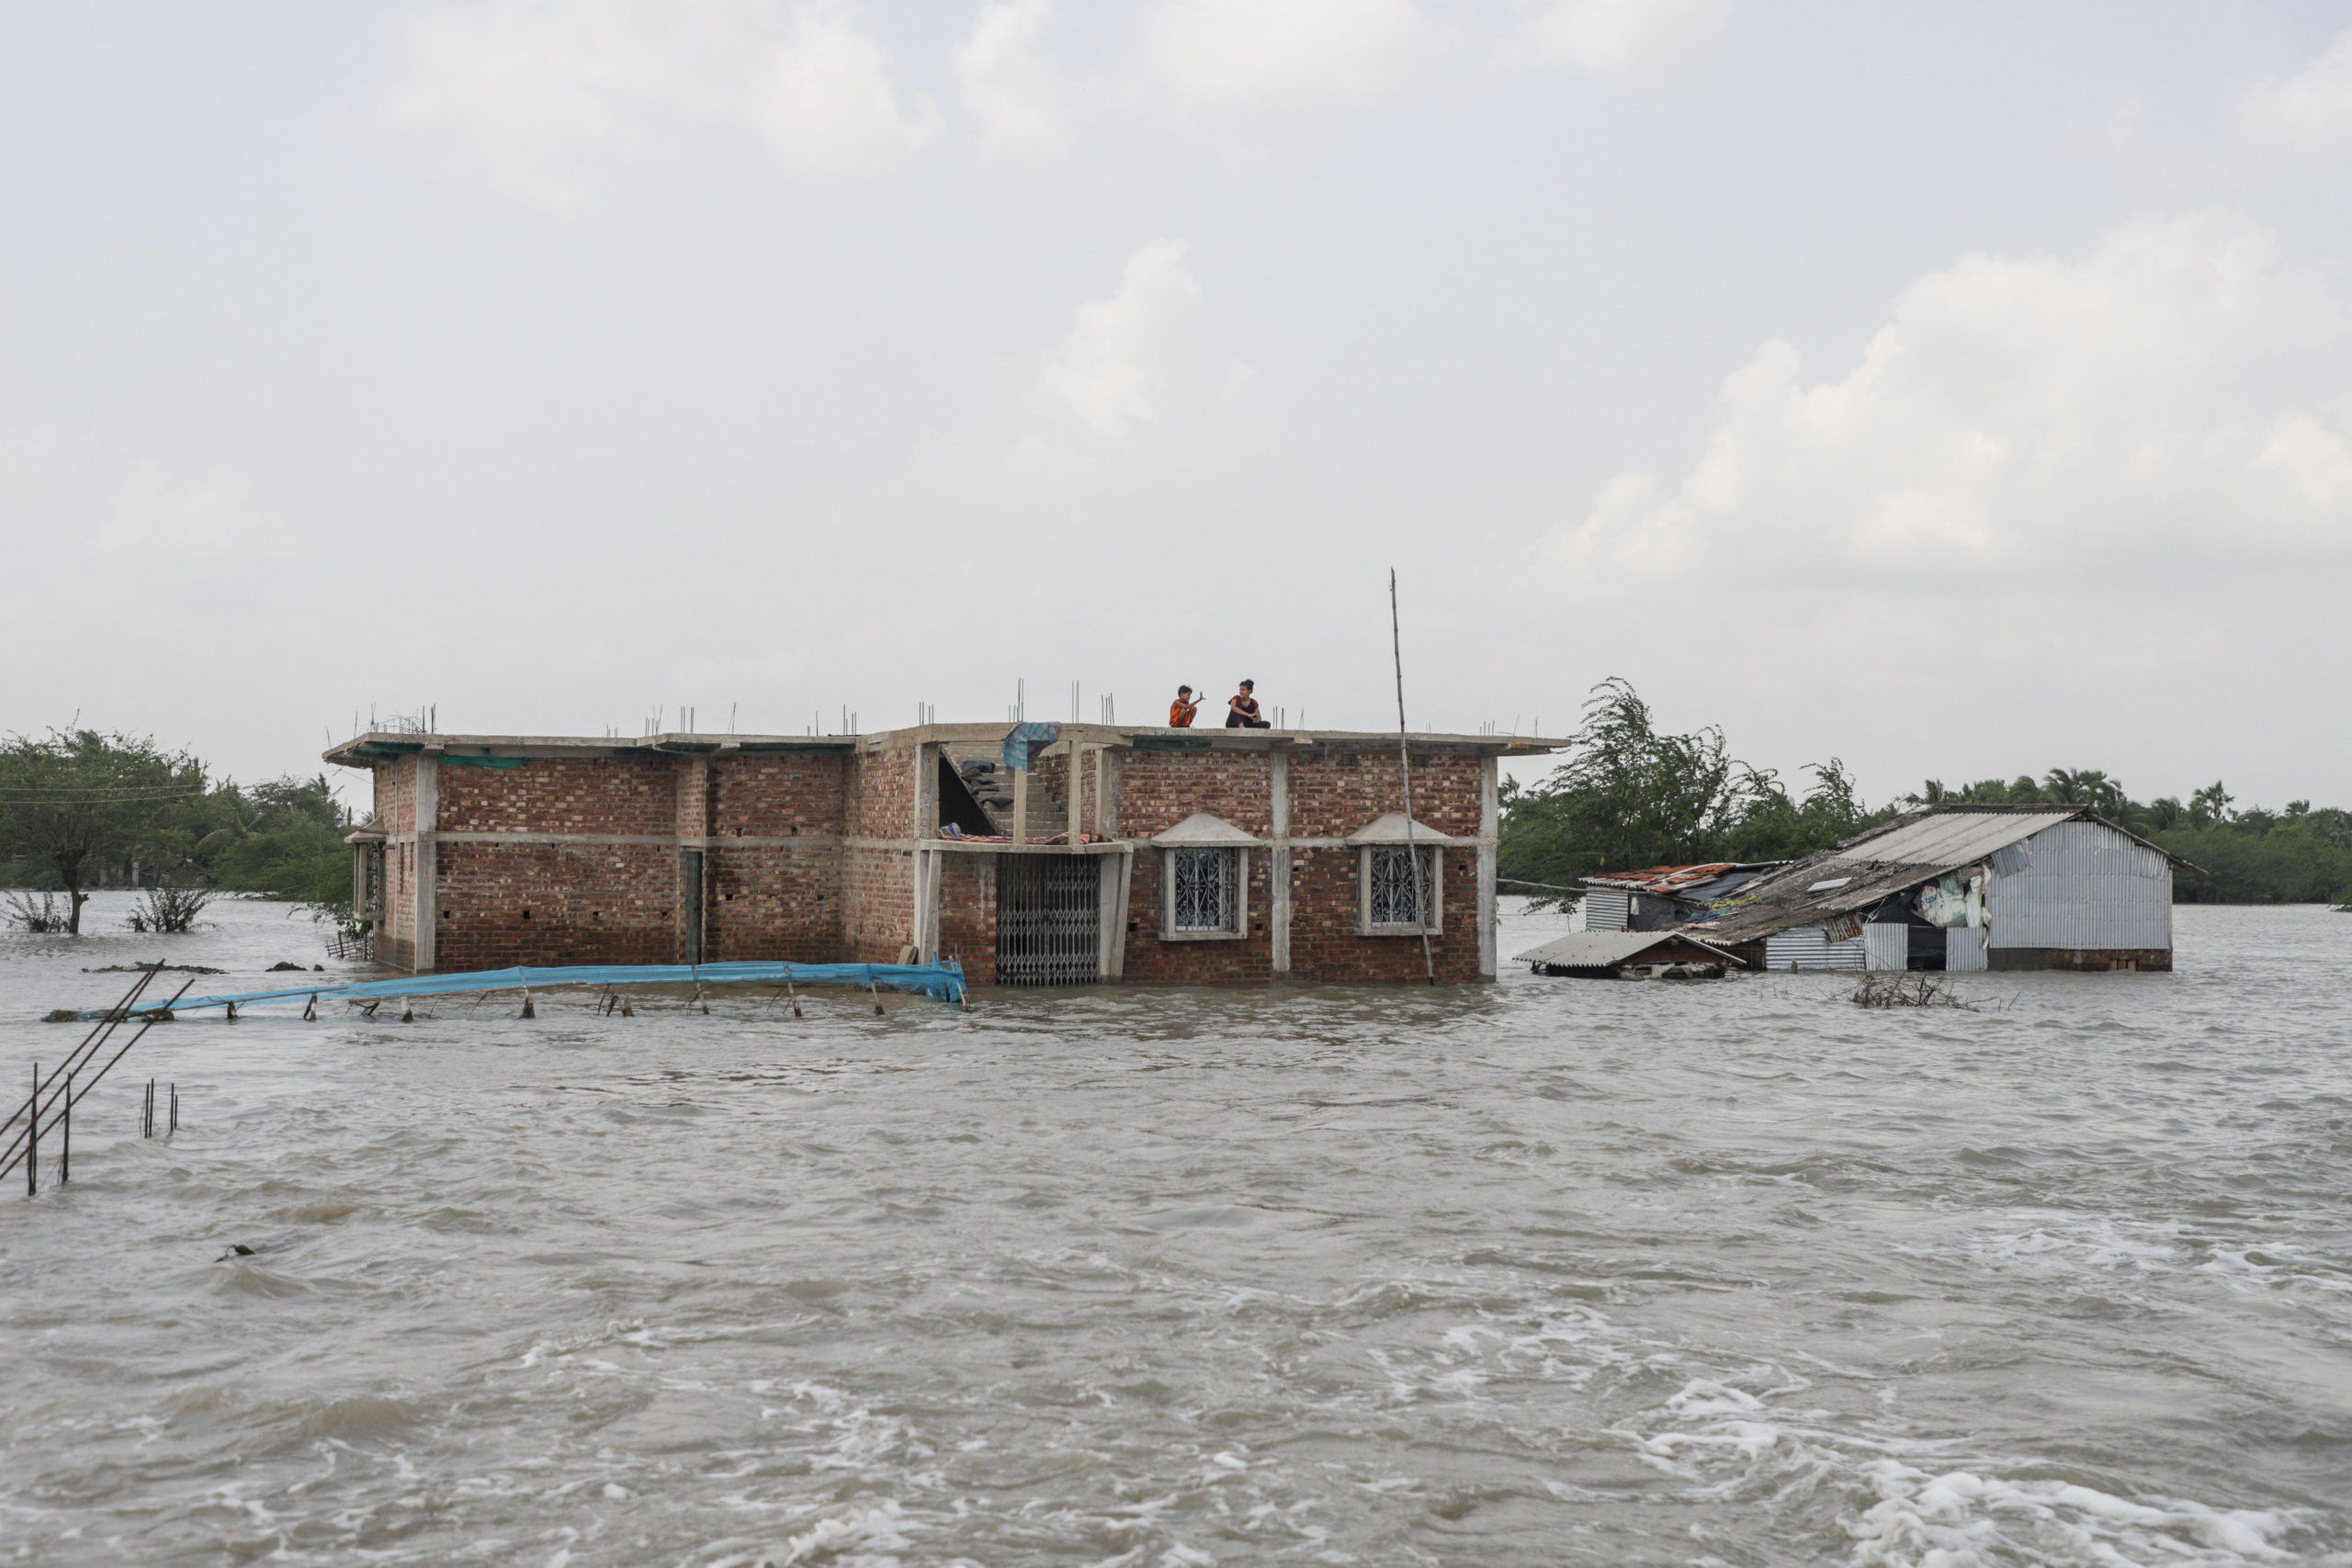 <p>Dhamakhali, a flooded coastal village in West Bengal, India, on 28 May 2021. The latest IPCC report says such flooding will become more frequent and more severe due to climate change. (Image: Alamy)</p>